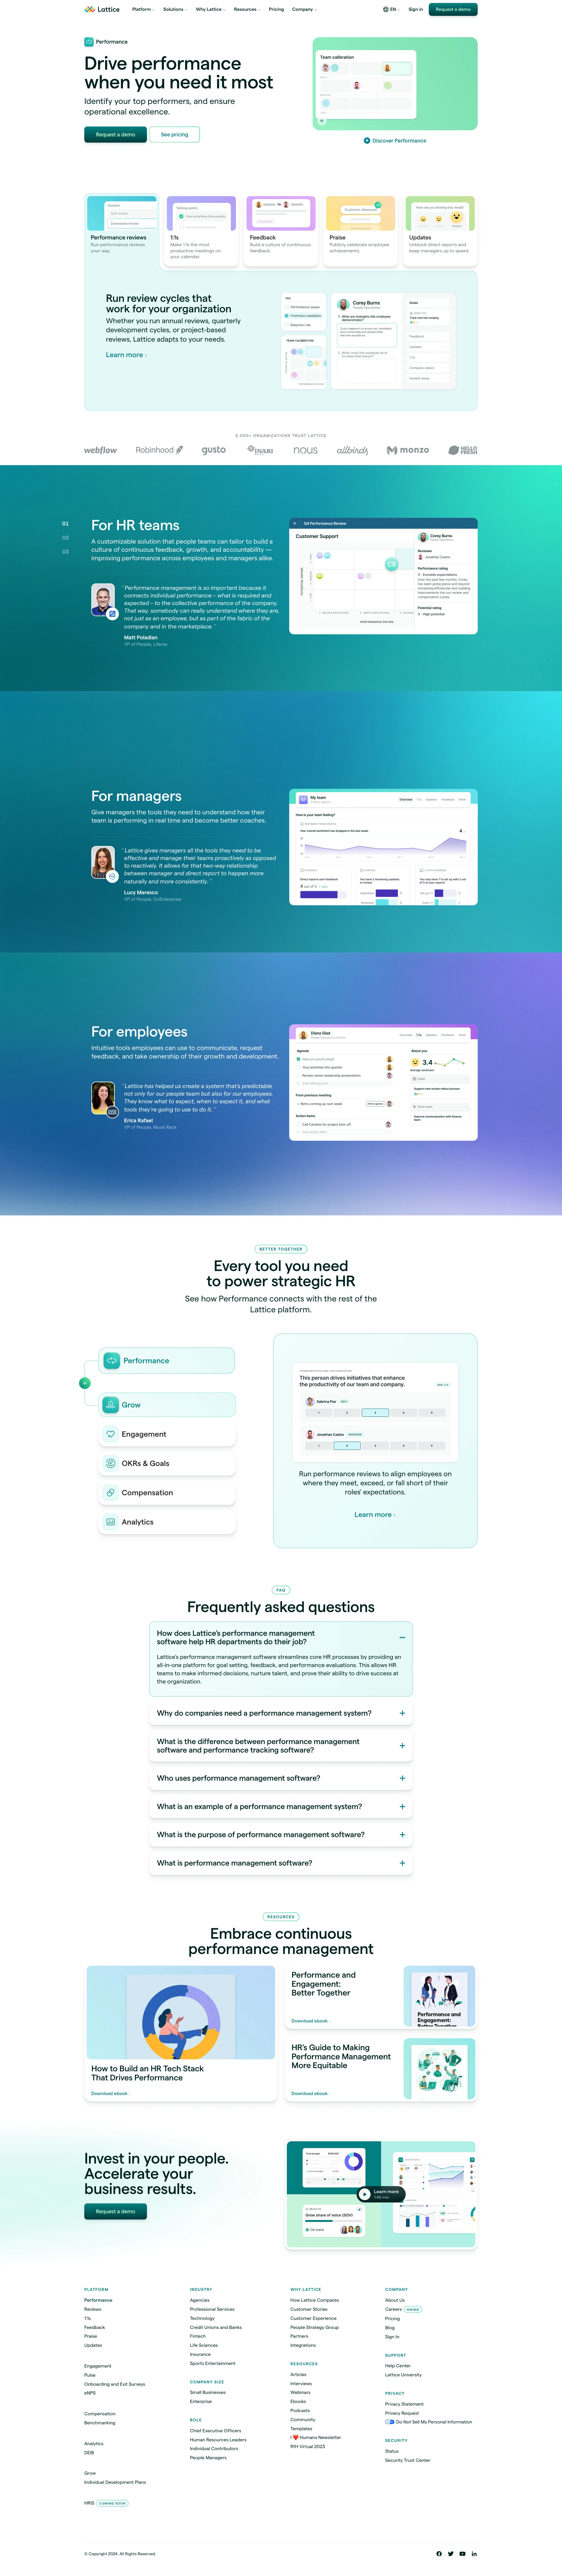 Lattice Landing Page Example: Lattice is the people management platform that empowers people leaders to build engaged, high-performing teams, inspire winning cultures, and make strategic, data-driven business decisions.